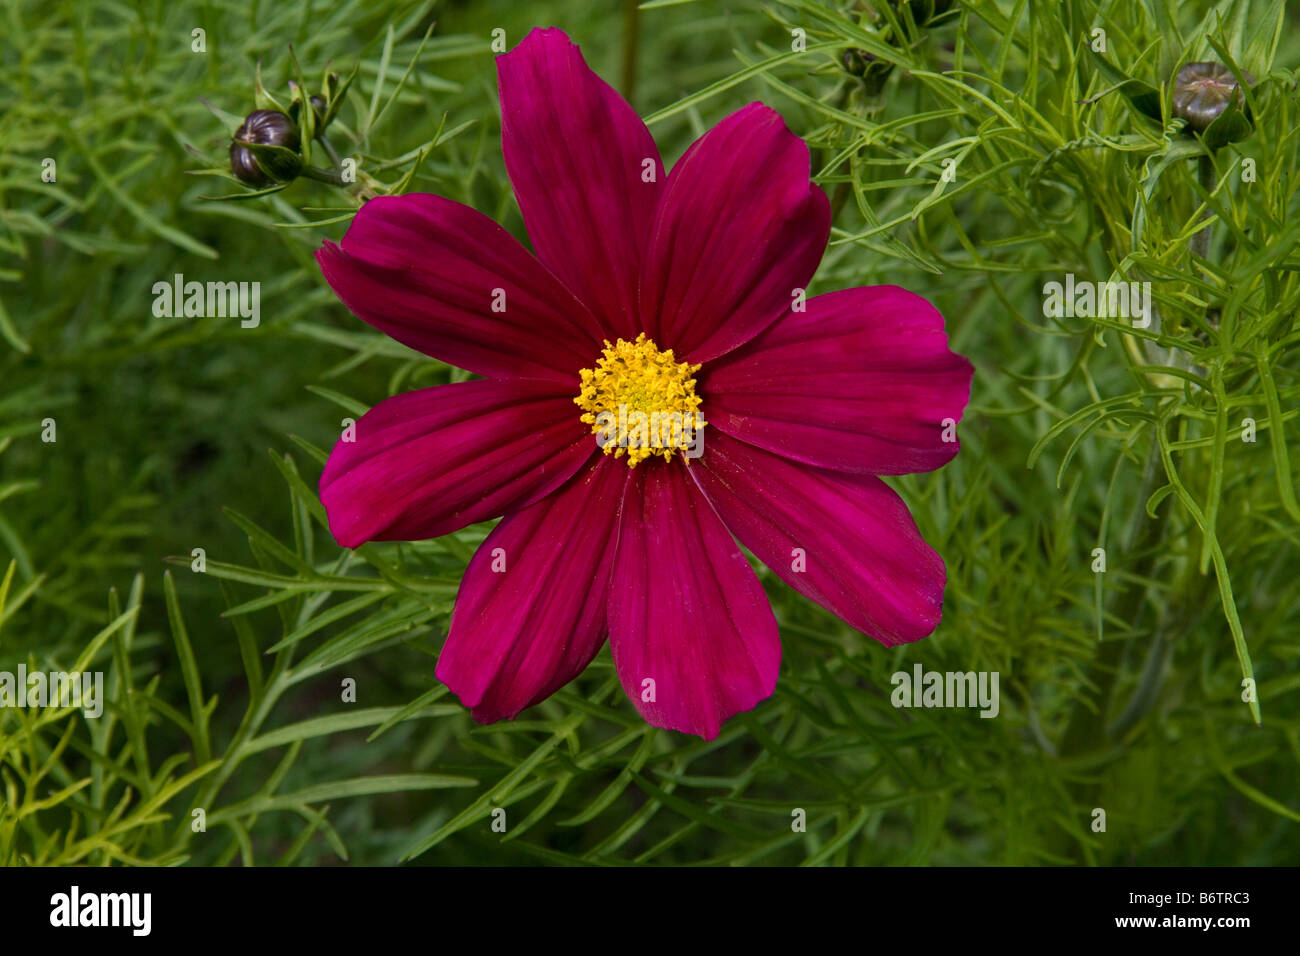 Red cosmos flower showing foliage and buds, together with fully opened bloom. Stock Photo